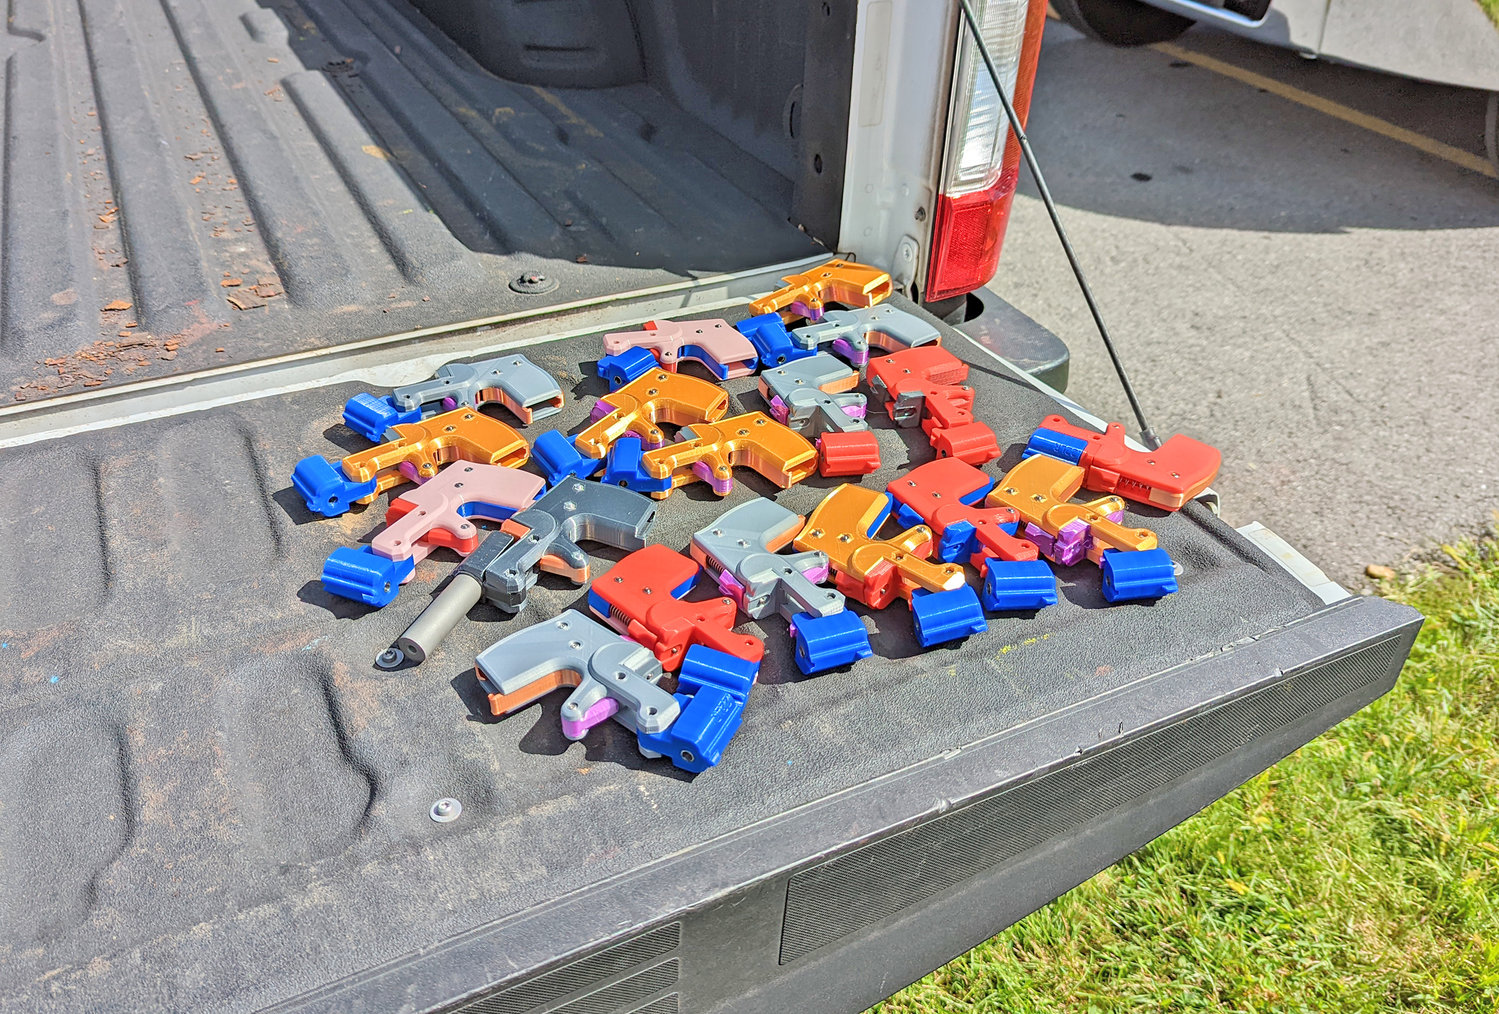 A collection of ghost gun parts collected by law enforcement at the gun buyback event in Utica on Saturday. The toy-like pieces are used to assemble homemade handguns.